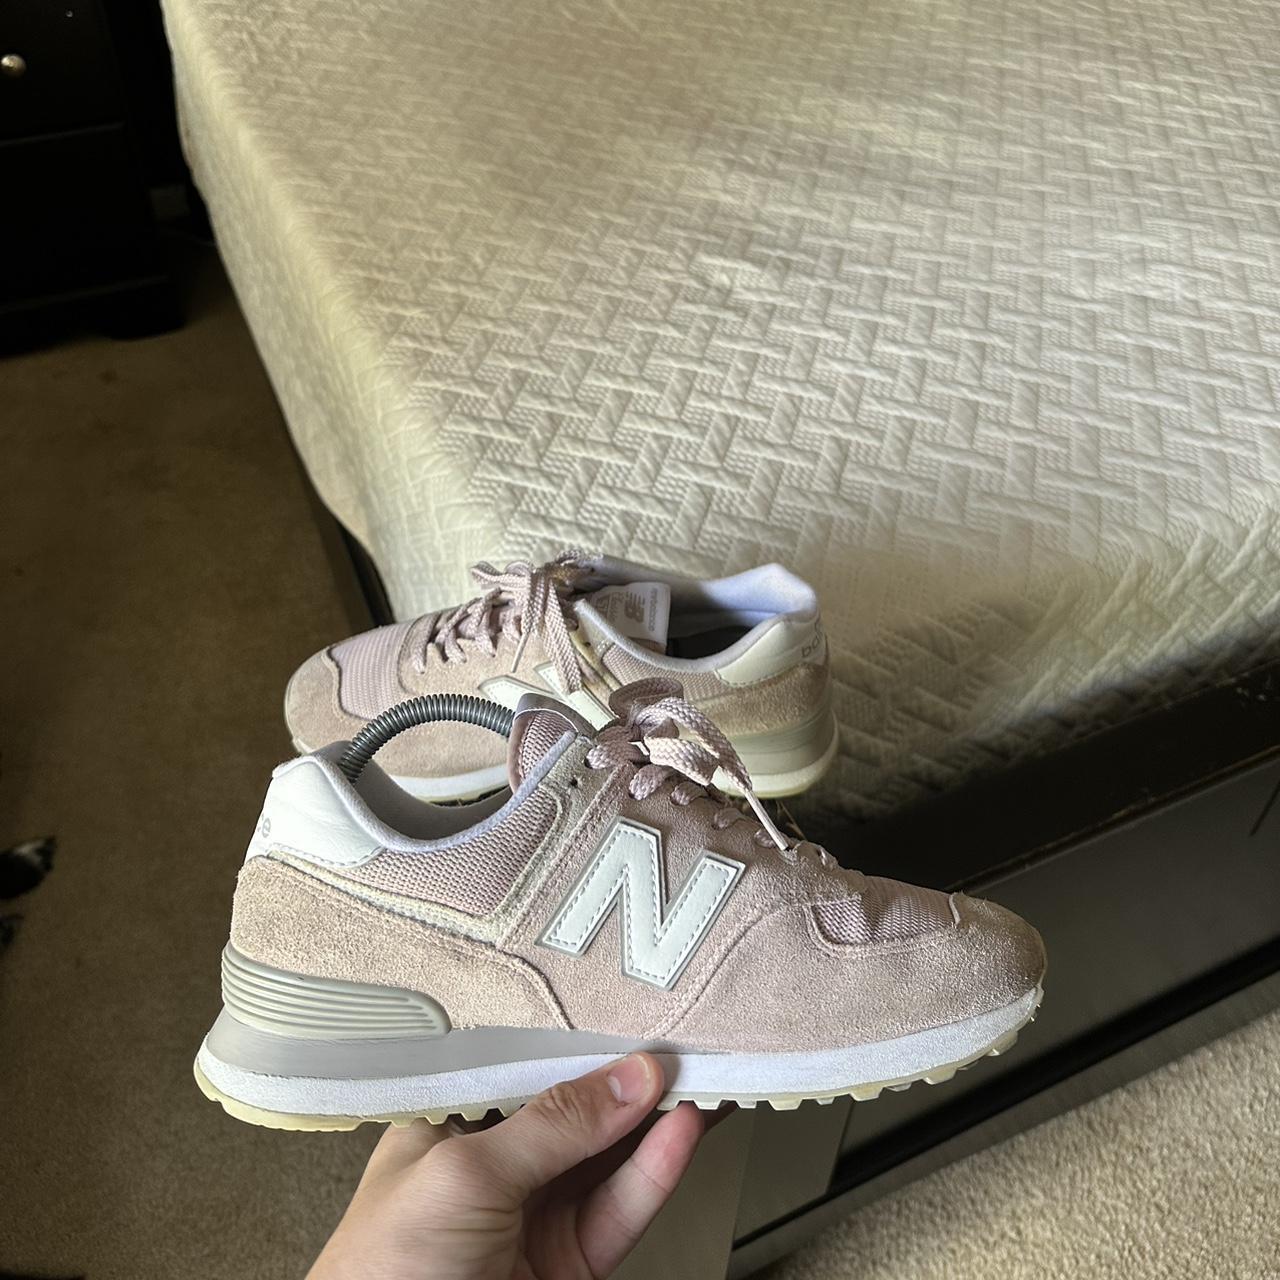 New Balance Women's Pink and White Trainers (8)